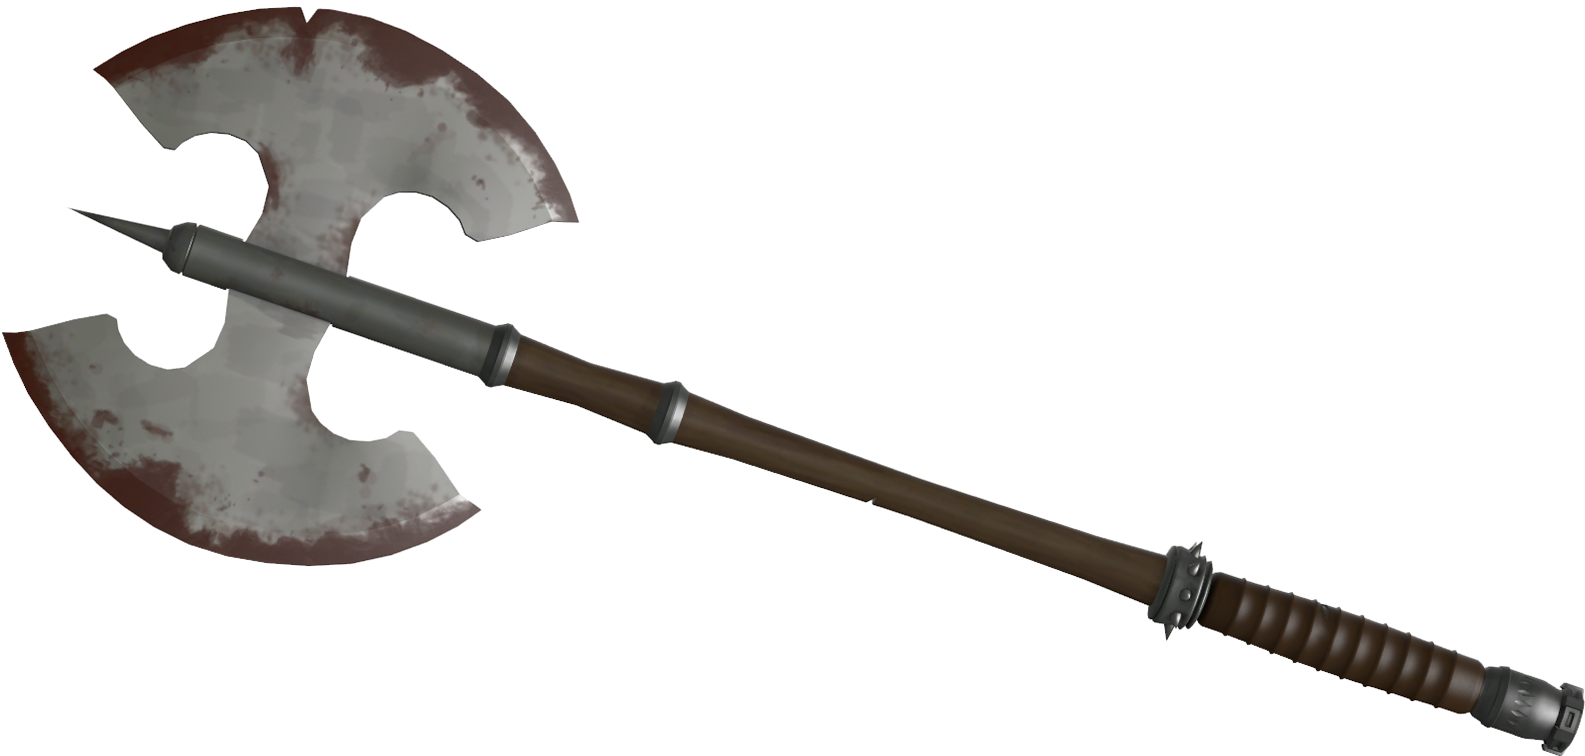 Weapon PNG Image